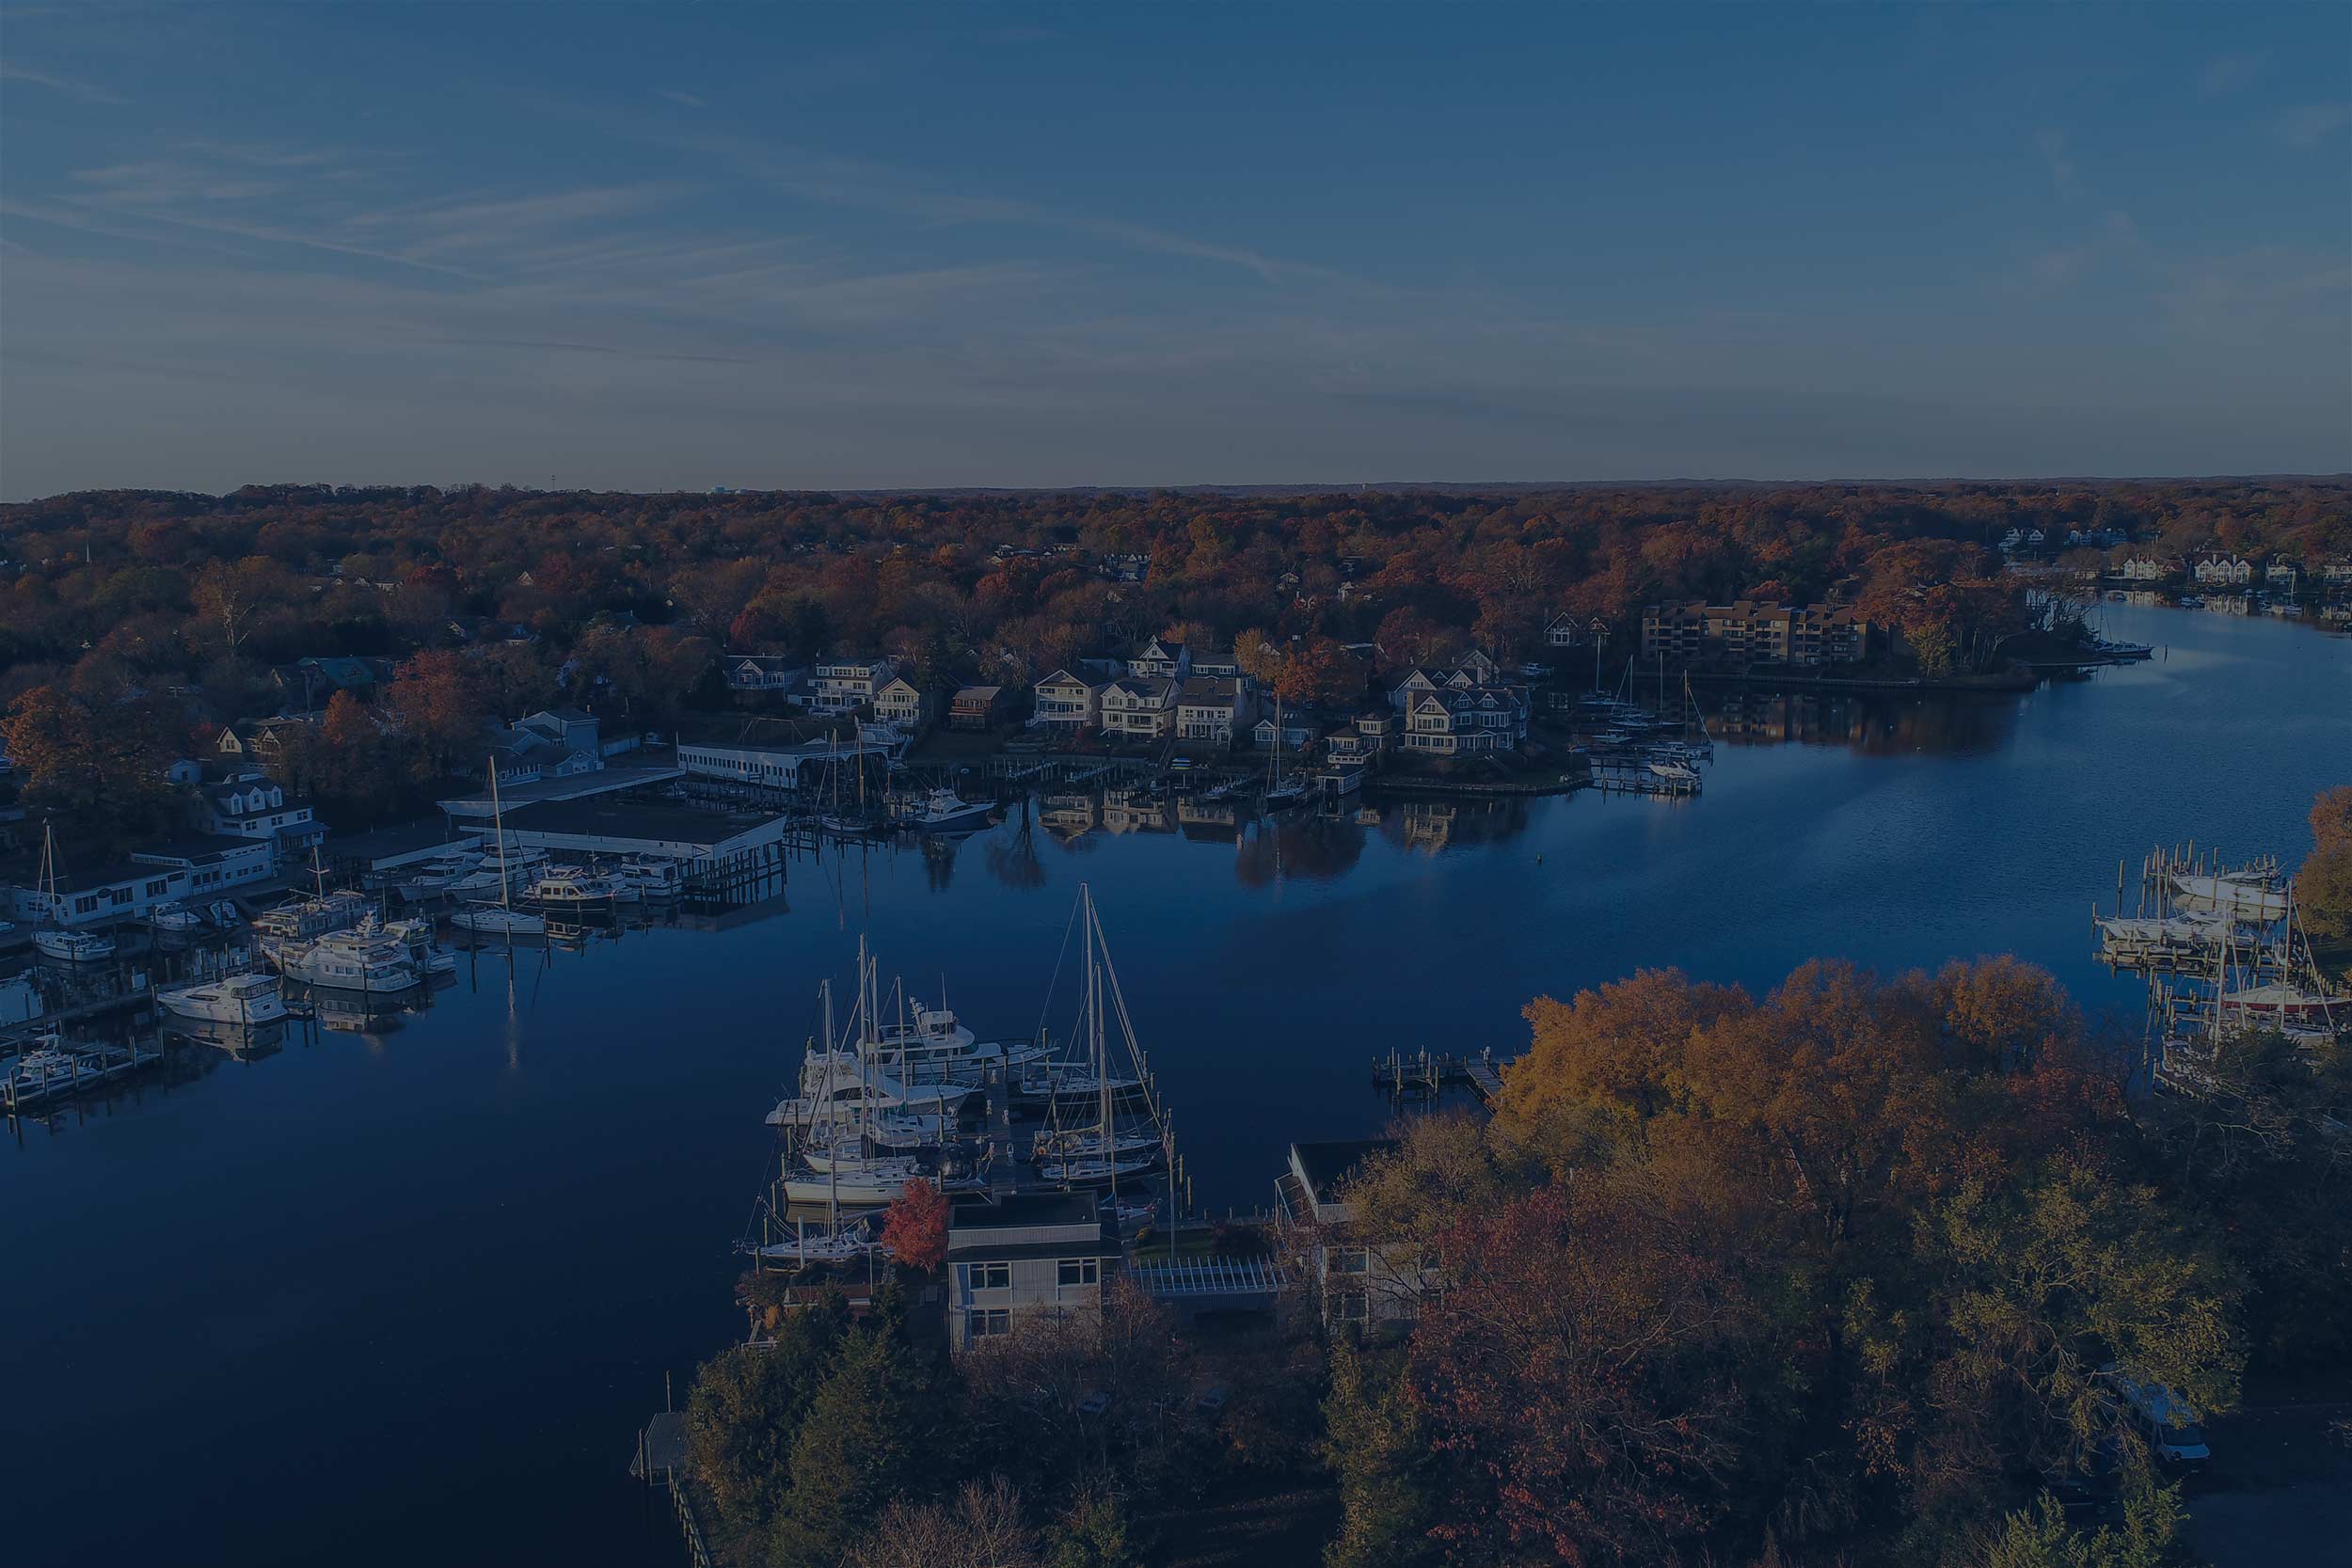 Overhead shot of the Chesapeake Bay with boats on the water